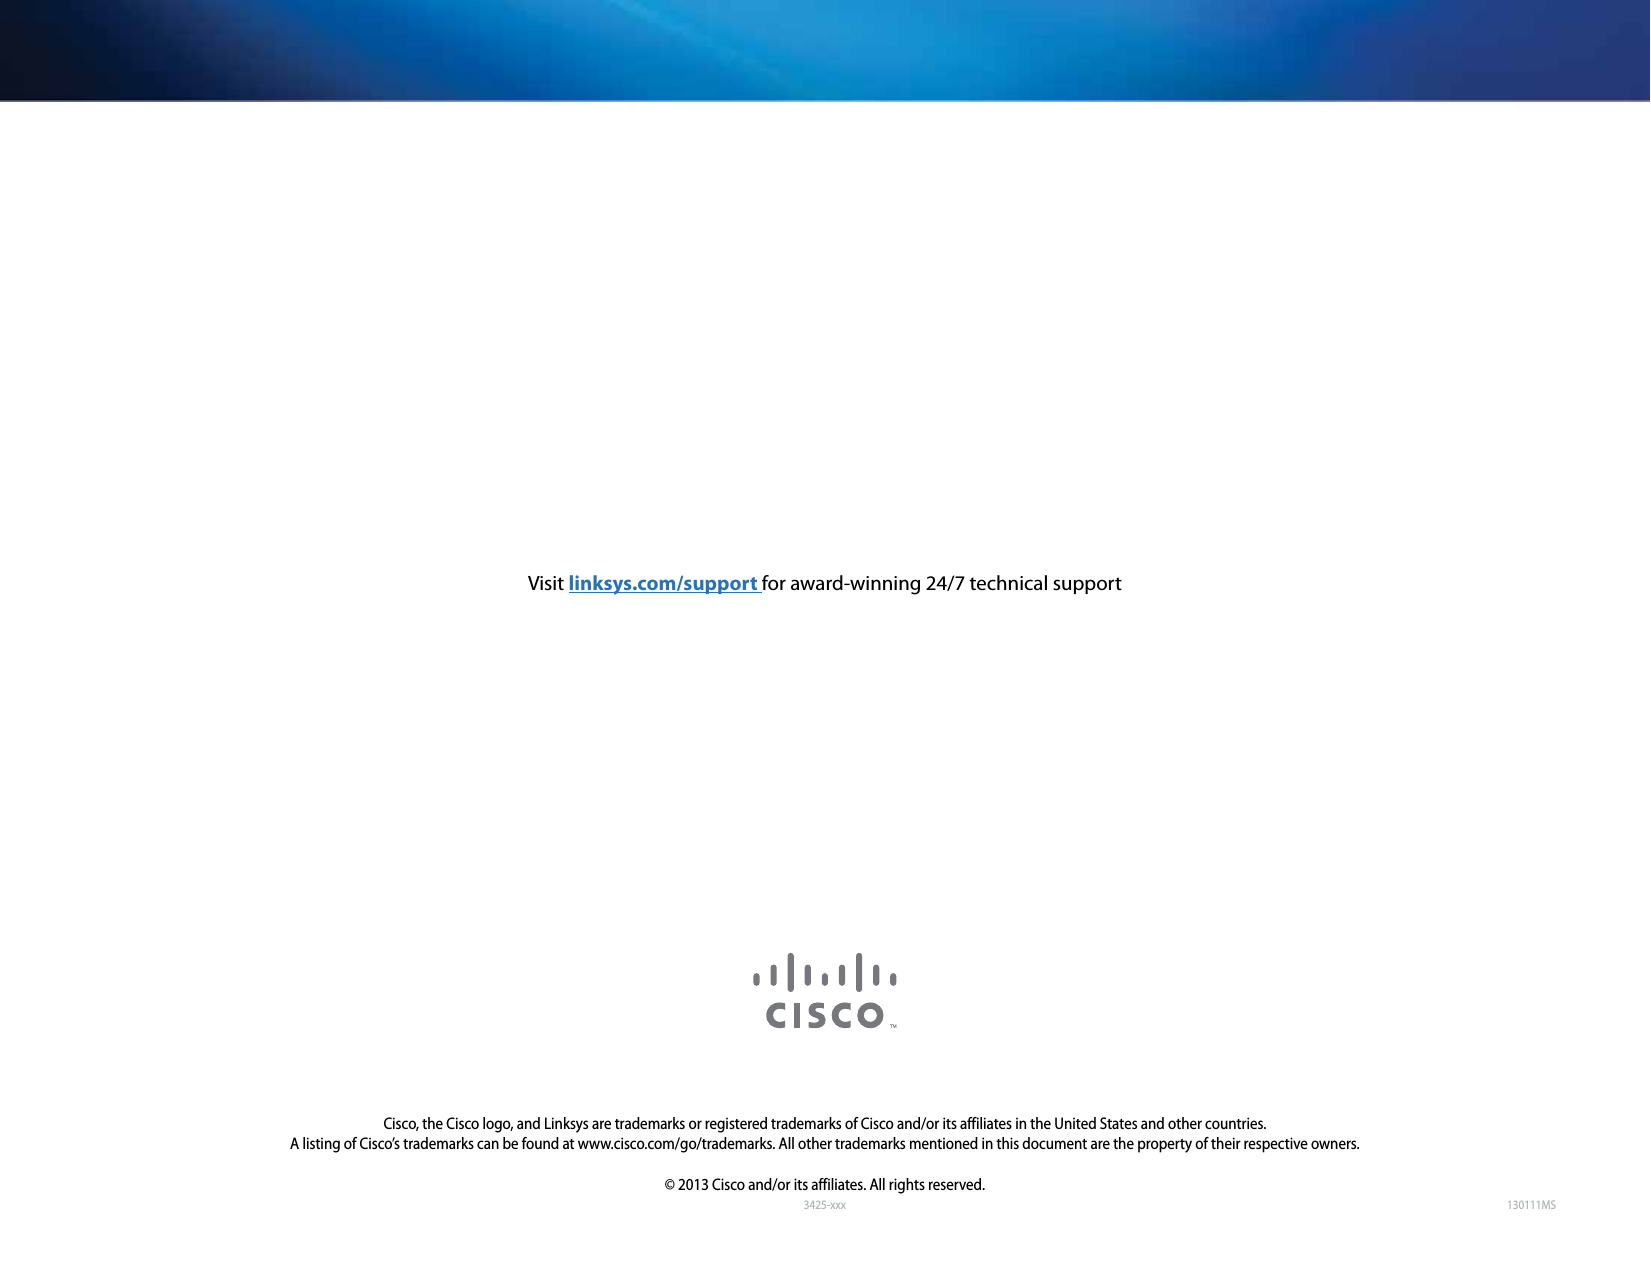 3425-xxxCisco, the Cisco logo, and Linksys are trademarks or registered trademarks of Cisco and/or its affiliates in the United States and other countries. A listing of Cisco’s trademarks can be found at www.cisco.com/go/trademarks. All other trademarks mentioned in this document are the property of their respective owners.© 2013 Cisco and/or its affiliates. All rights reserved.Visit linksys.com/support for award-winning 24/7 technical support130111MS